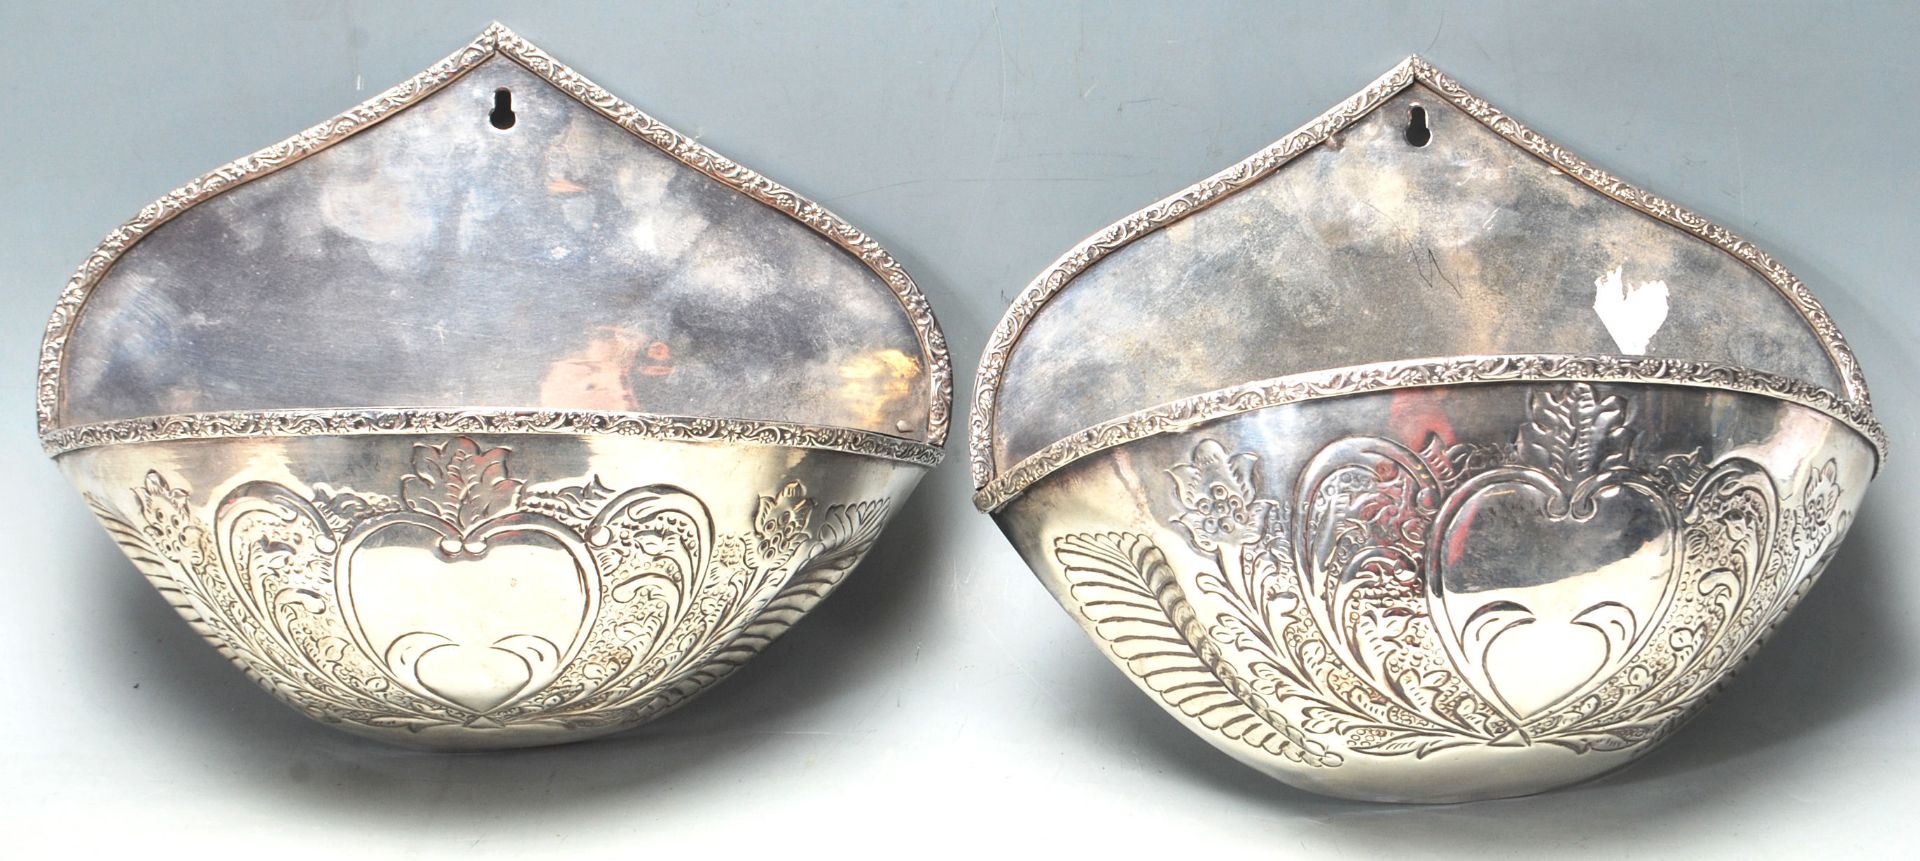 PAIR OF ANTIQUE STYLE SILVER PLATED STOOPS - WALL HANGING POCKETS